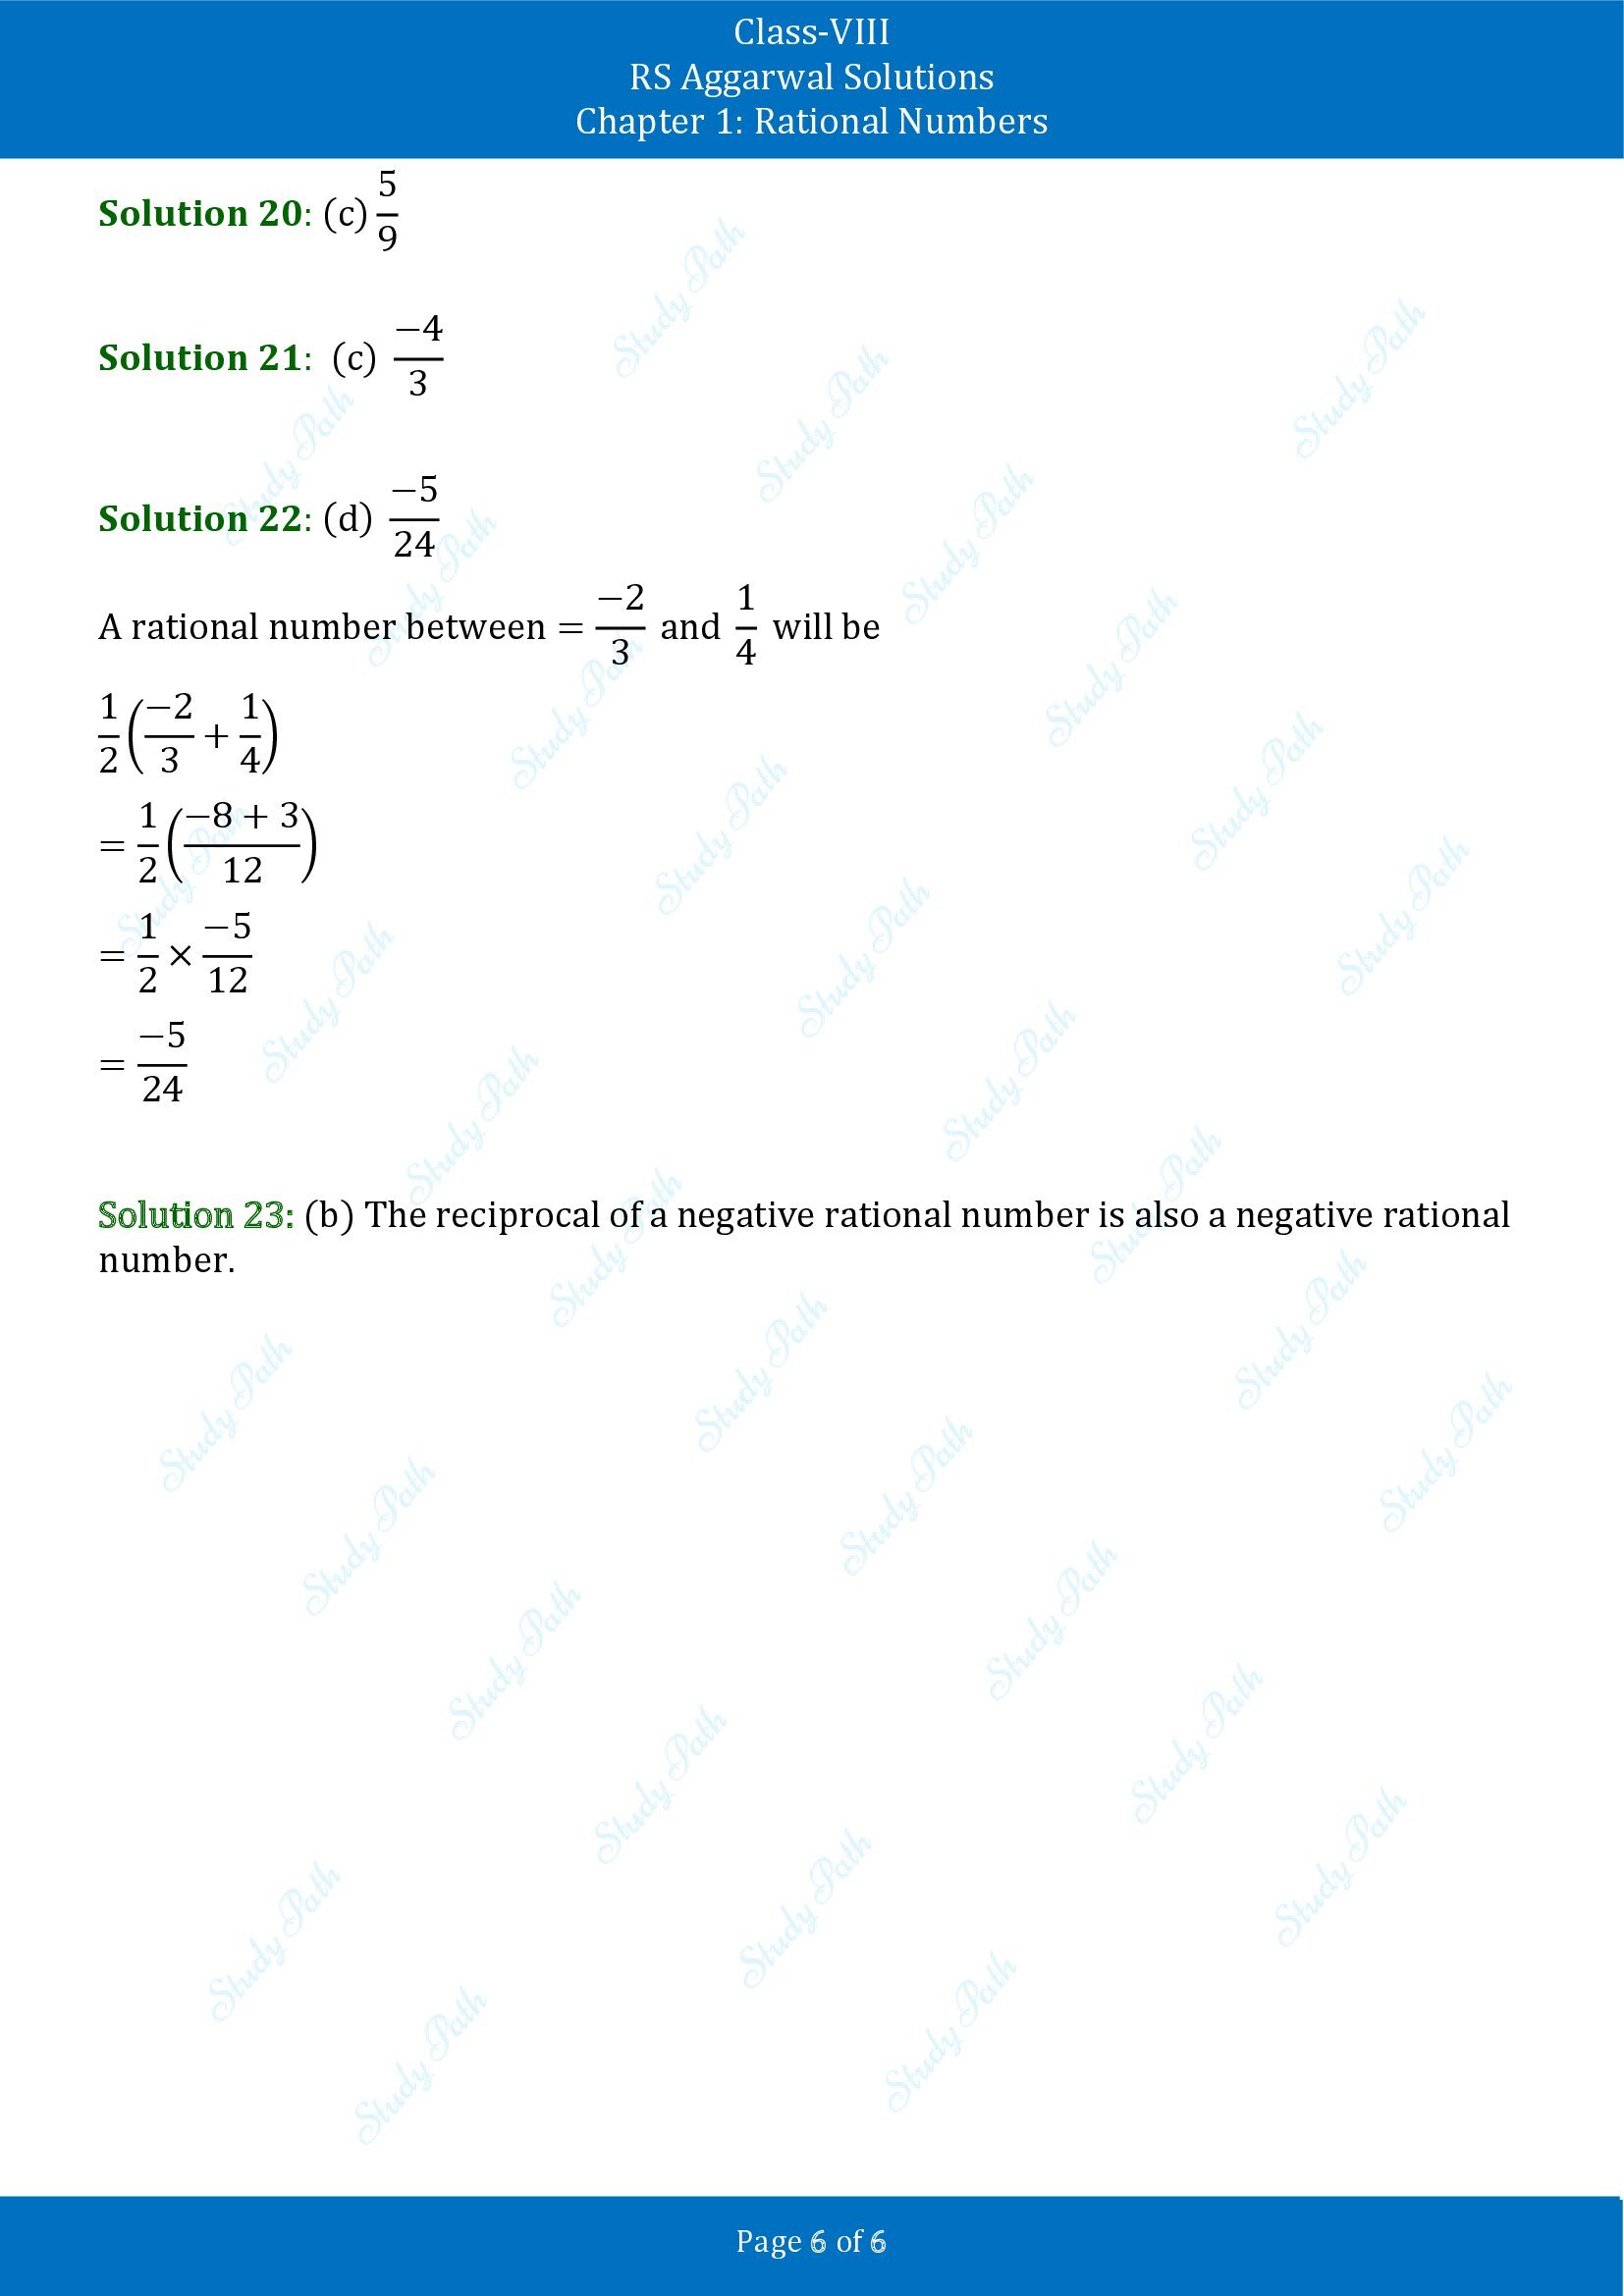 RS Aggarwal Solutions Class 8 Chapter 1 Rational Numbers Exercise 1H MCQs 00006